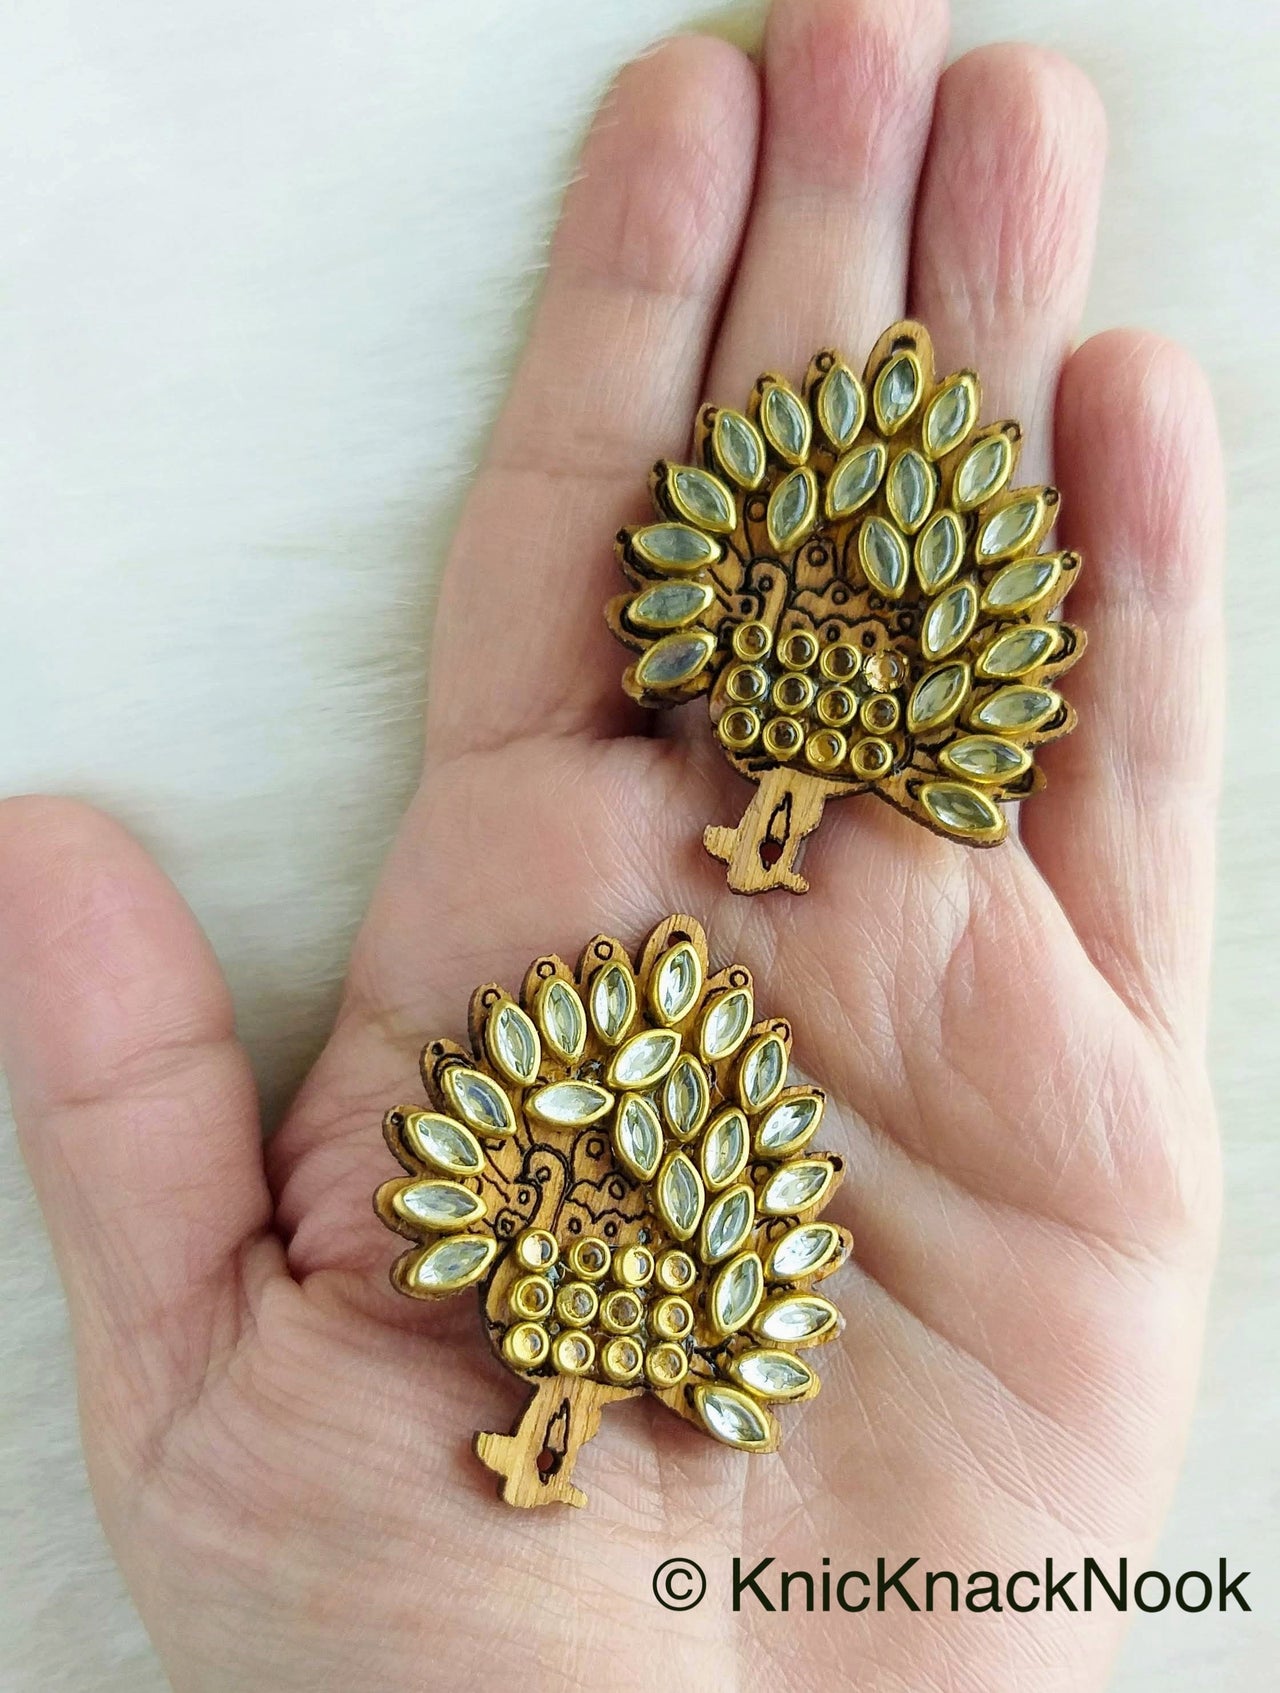 Peacock Shaped Wood Buttons With Clear Kundan Beads, Decorative Buttons, Carved Buttons